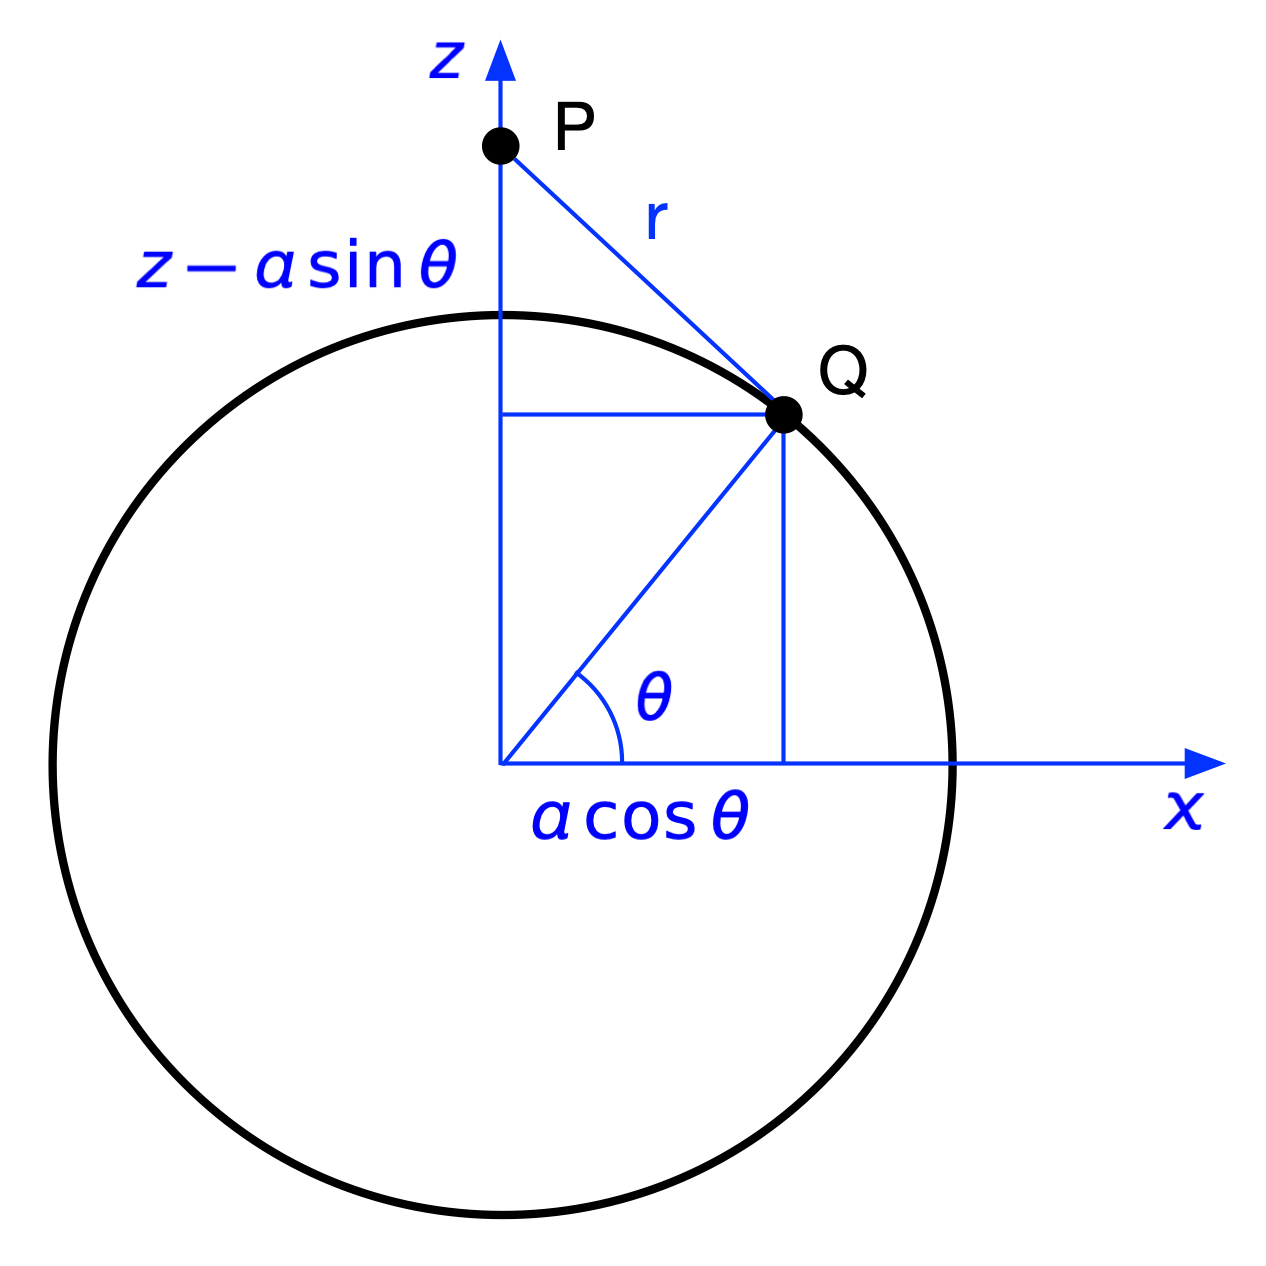 Geometry with P above Q